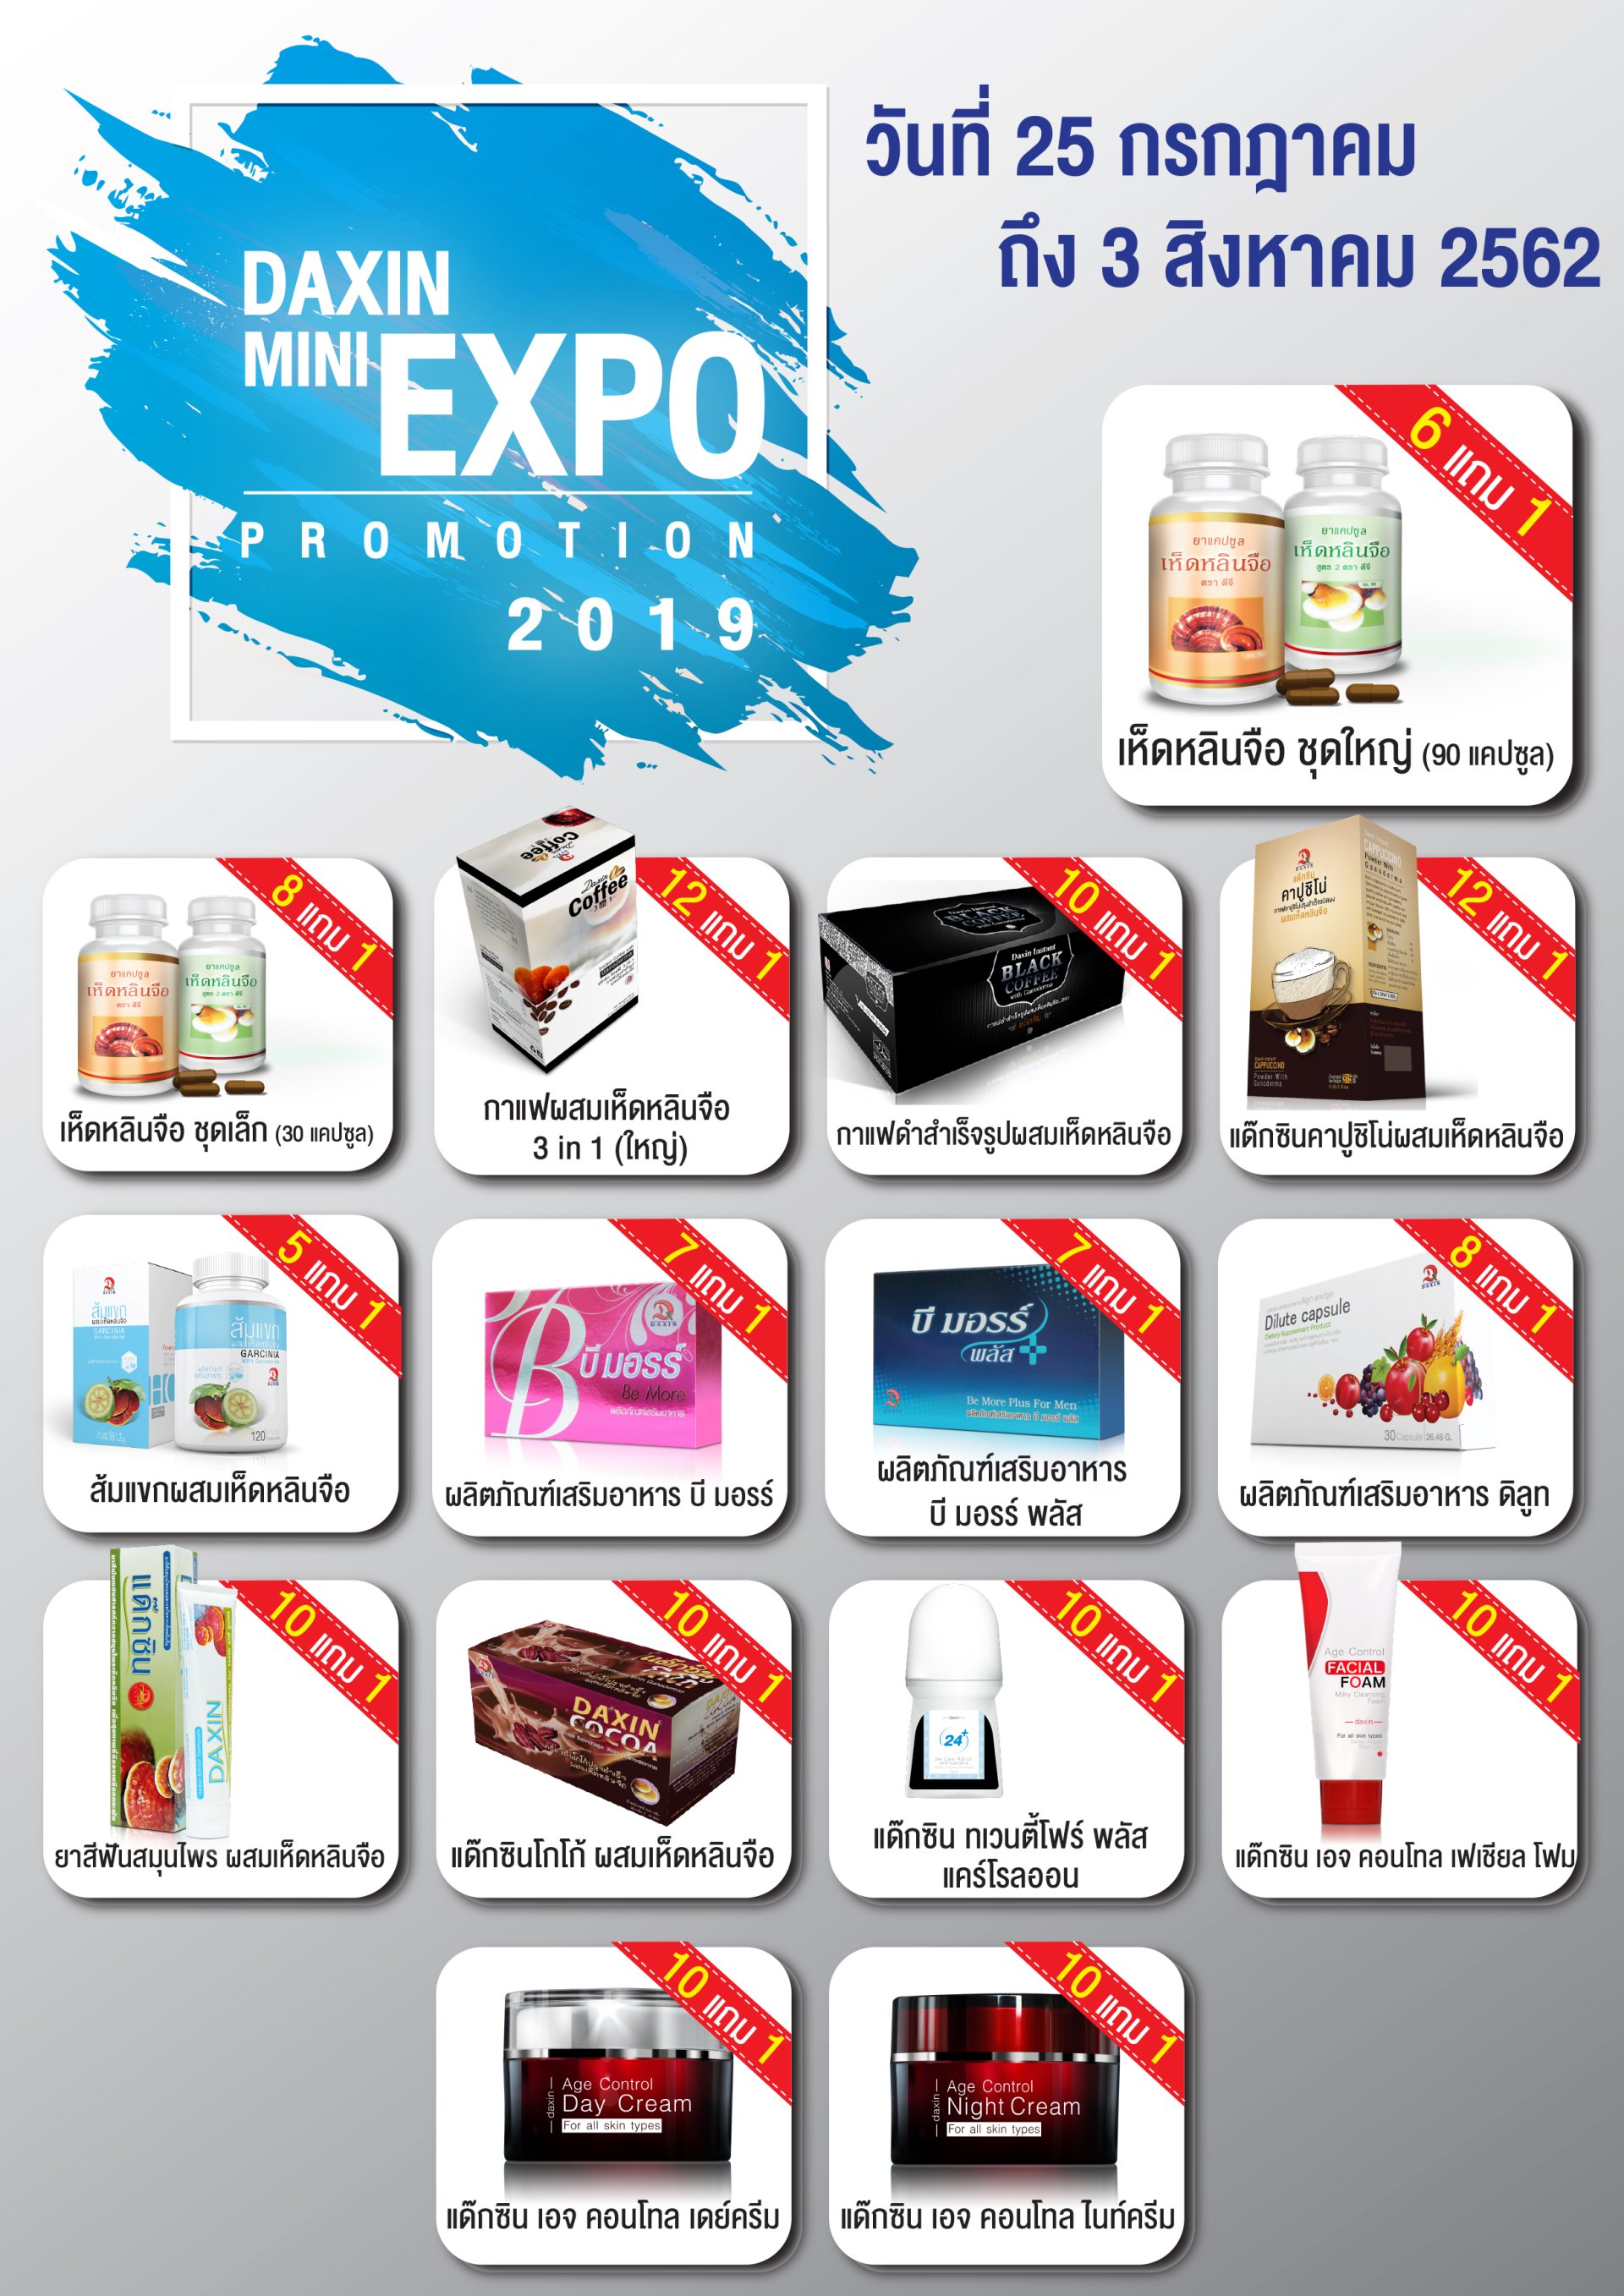 DAXIN MINI EXPO Promotion 2019 